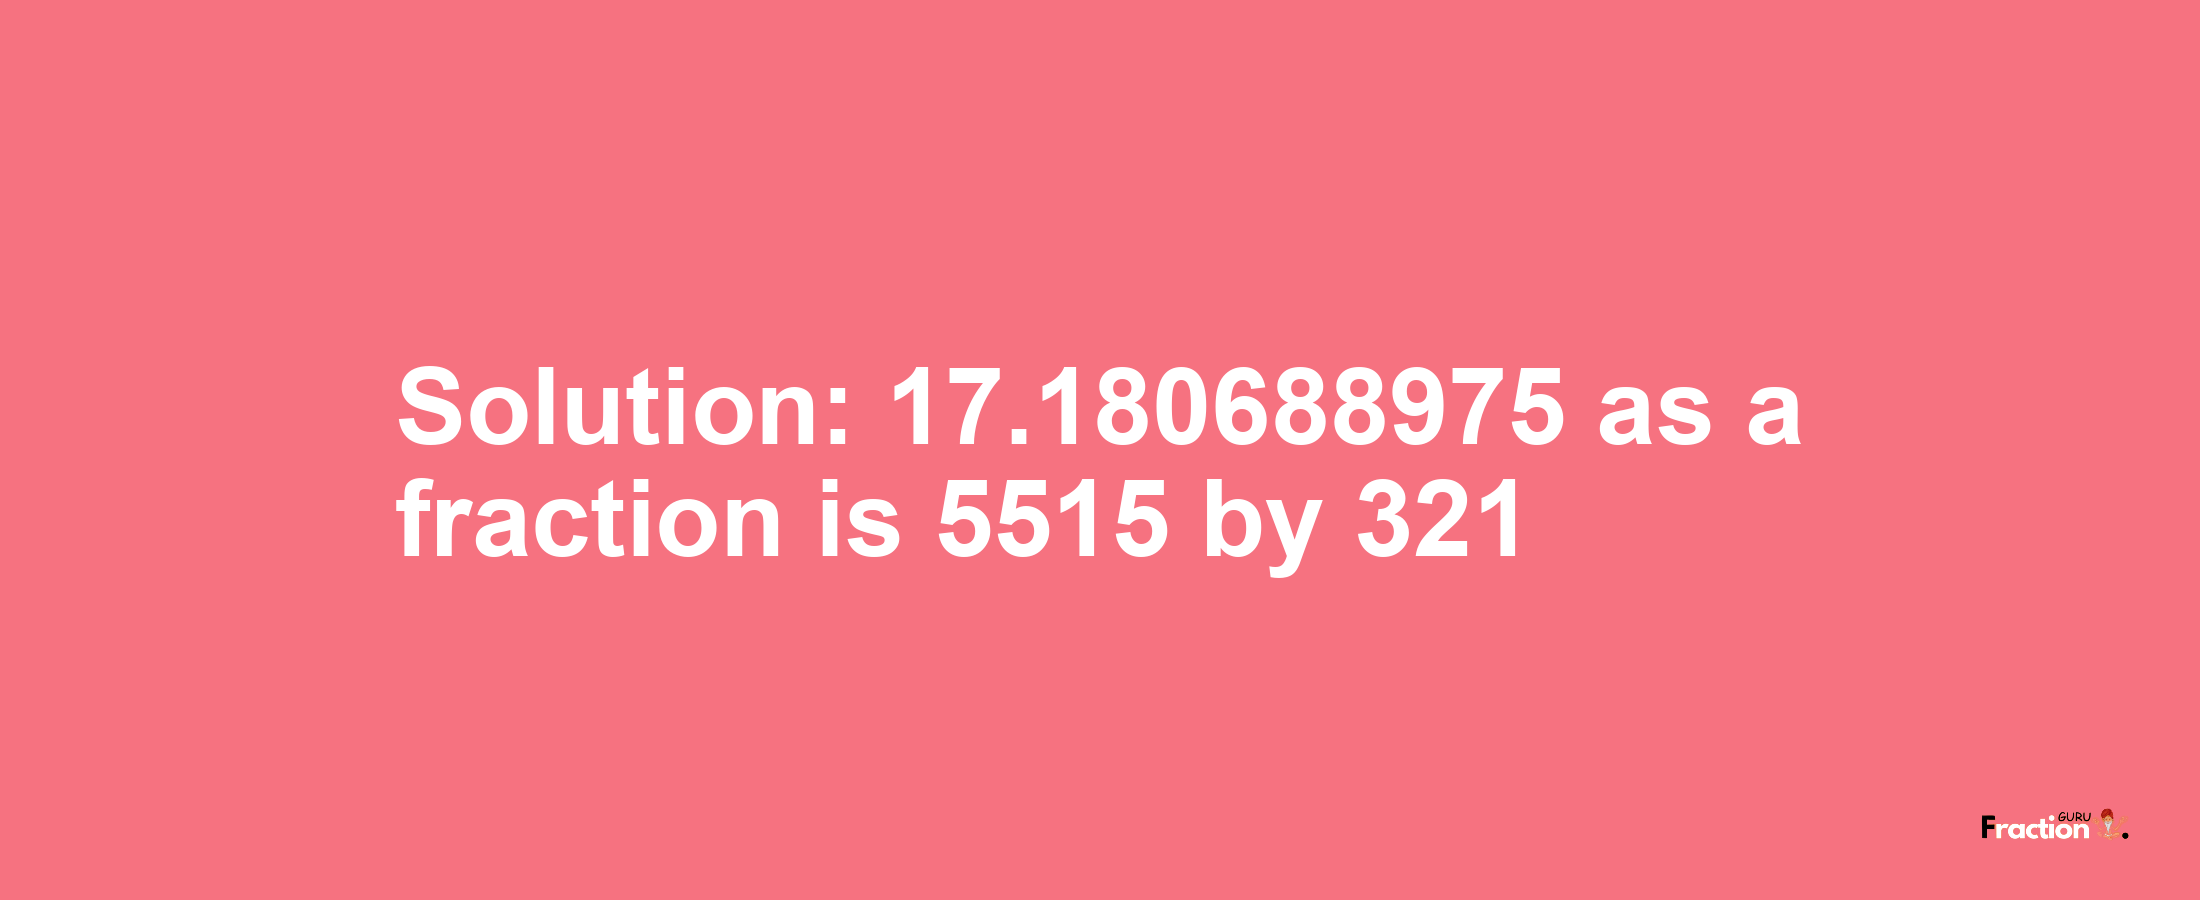 Solution:17.180688975 as a fraction is 5515/321